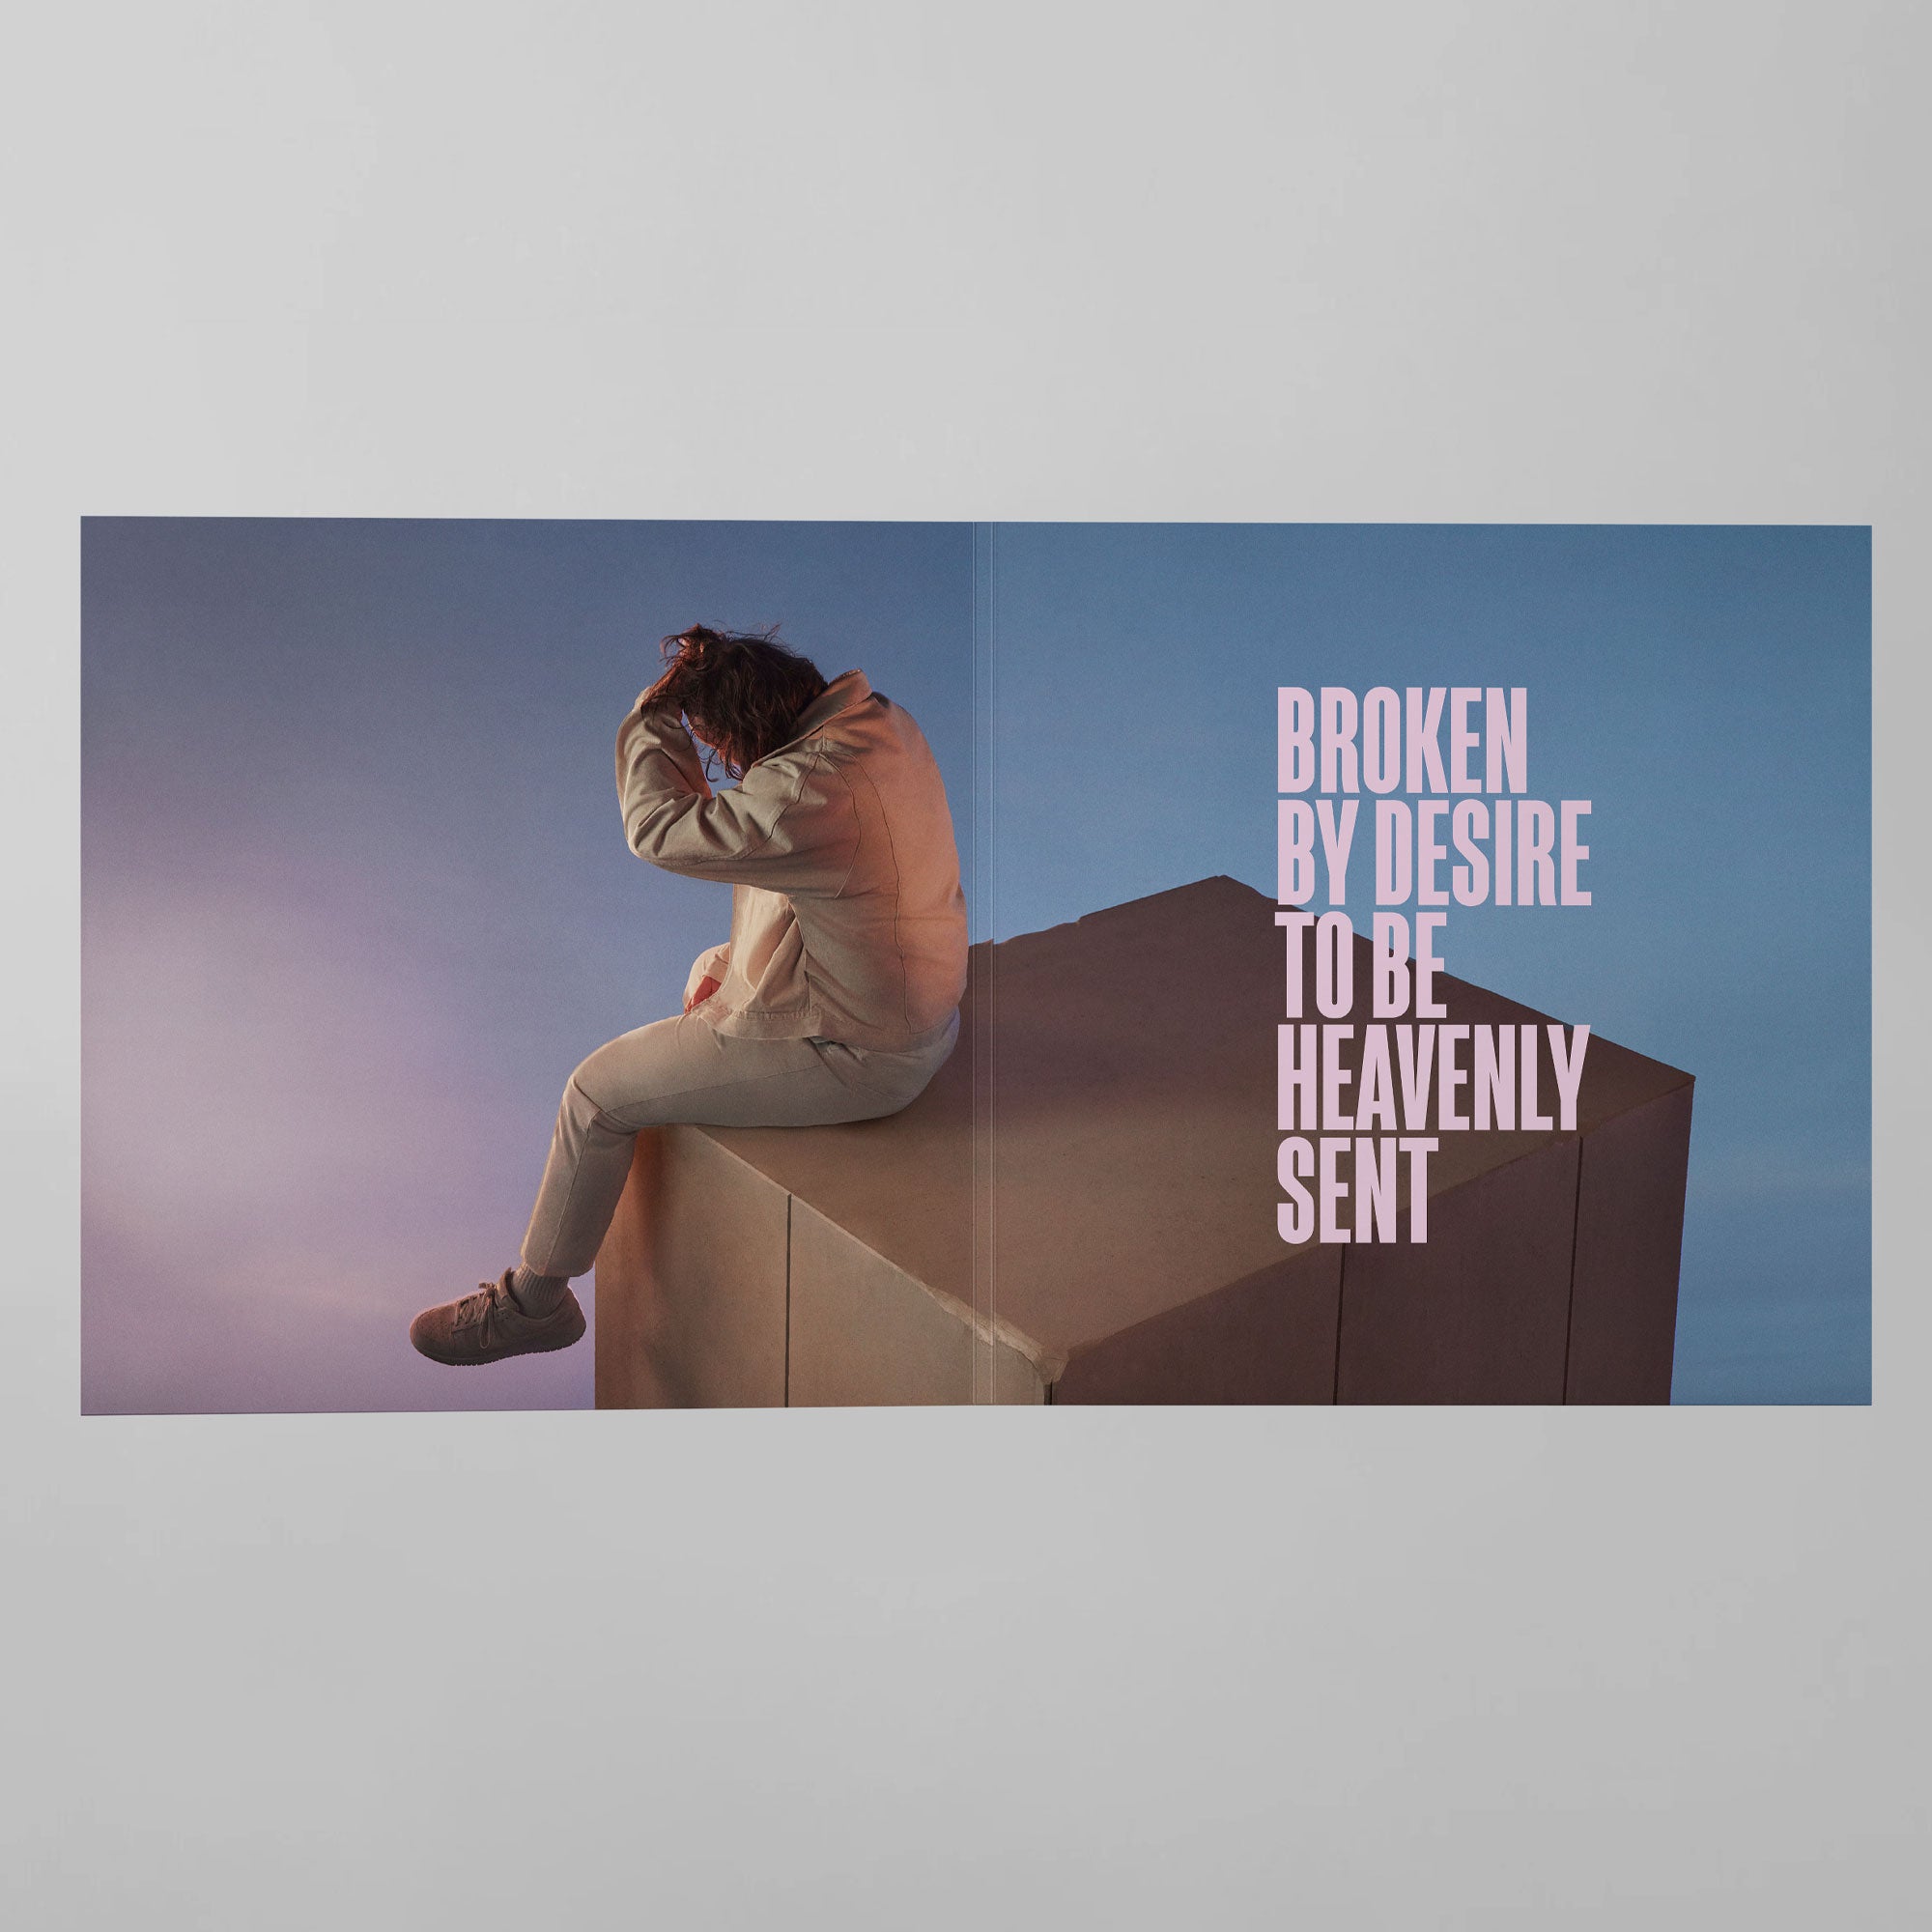 Lewis Capaldi - Official Store - Broken By Desire To Be Heavenly Sent -  Lewis Capaldi - Limited Edition White LP Collectors Set